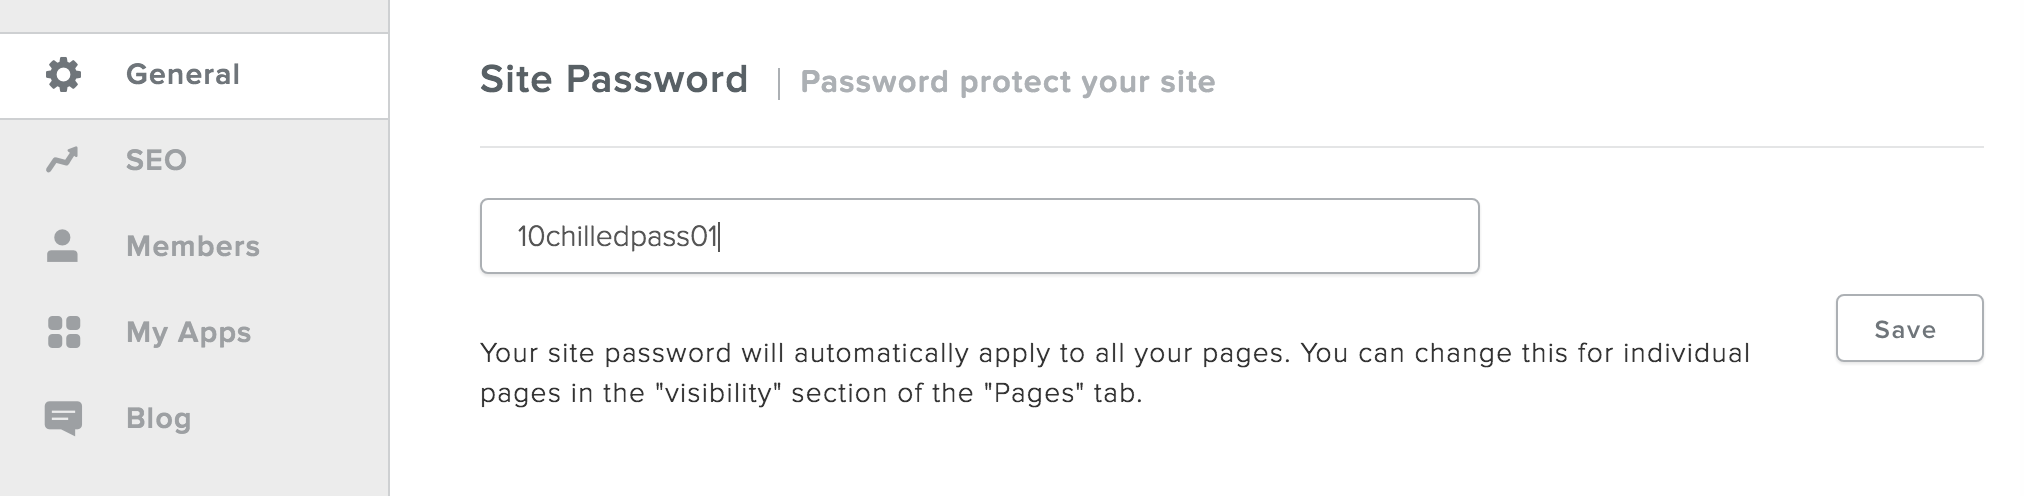 Setting Site Password Weebly